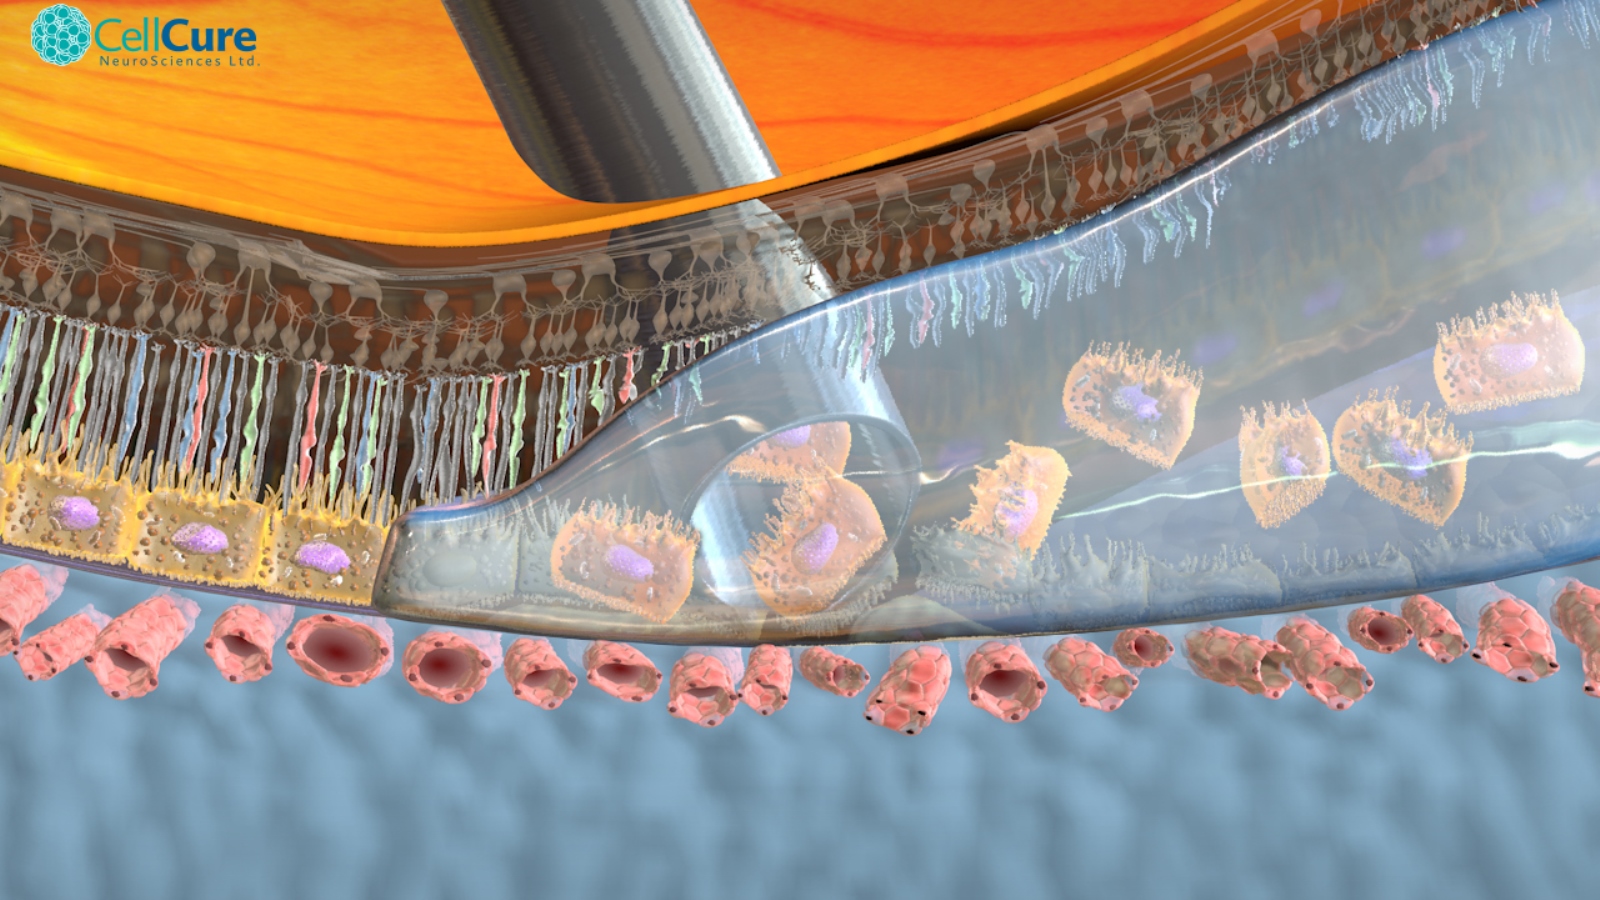 OpRegen being injected into a degenerating retina. Image courtesy of Cell Cure Neurosciences